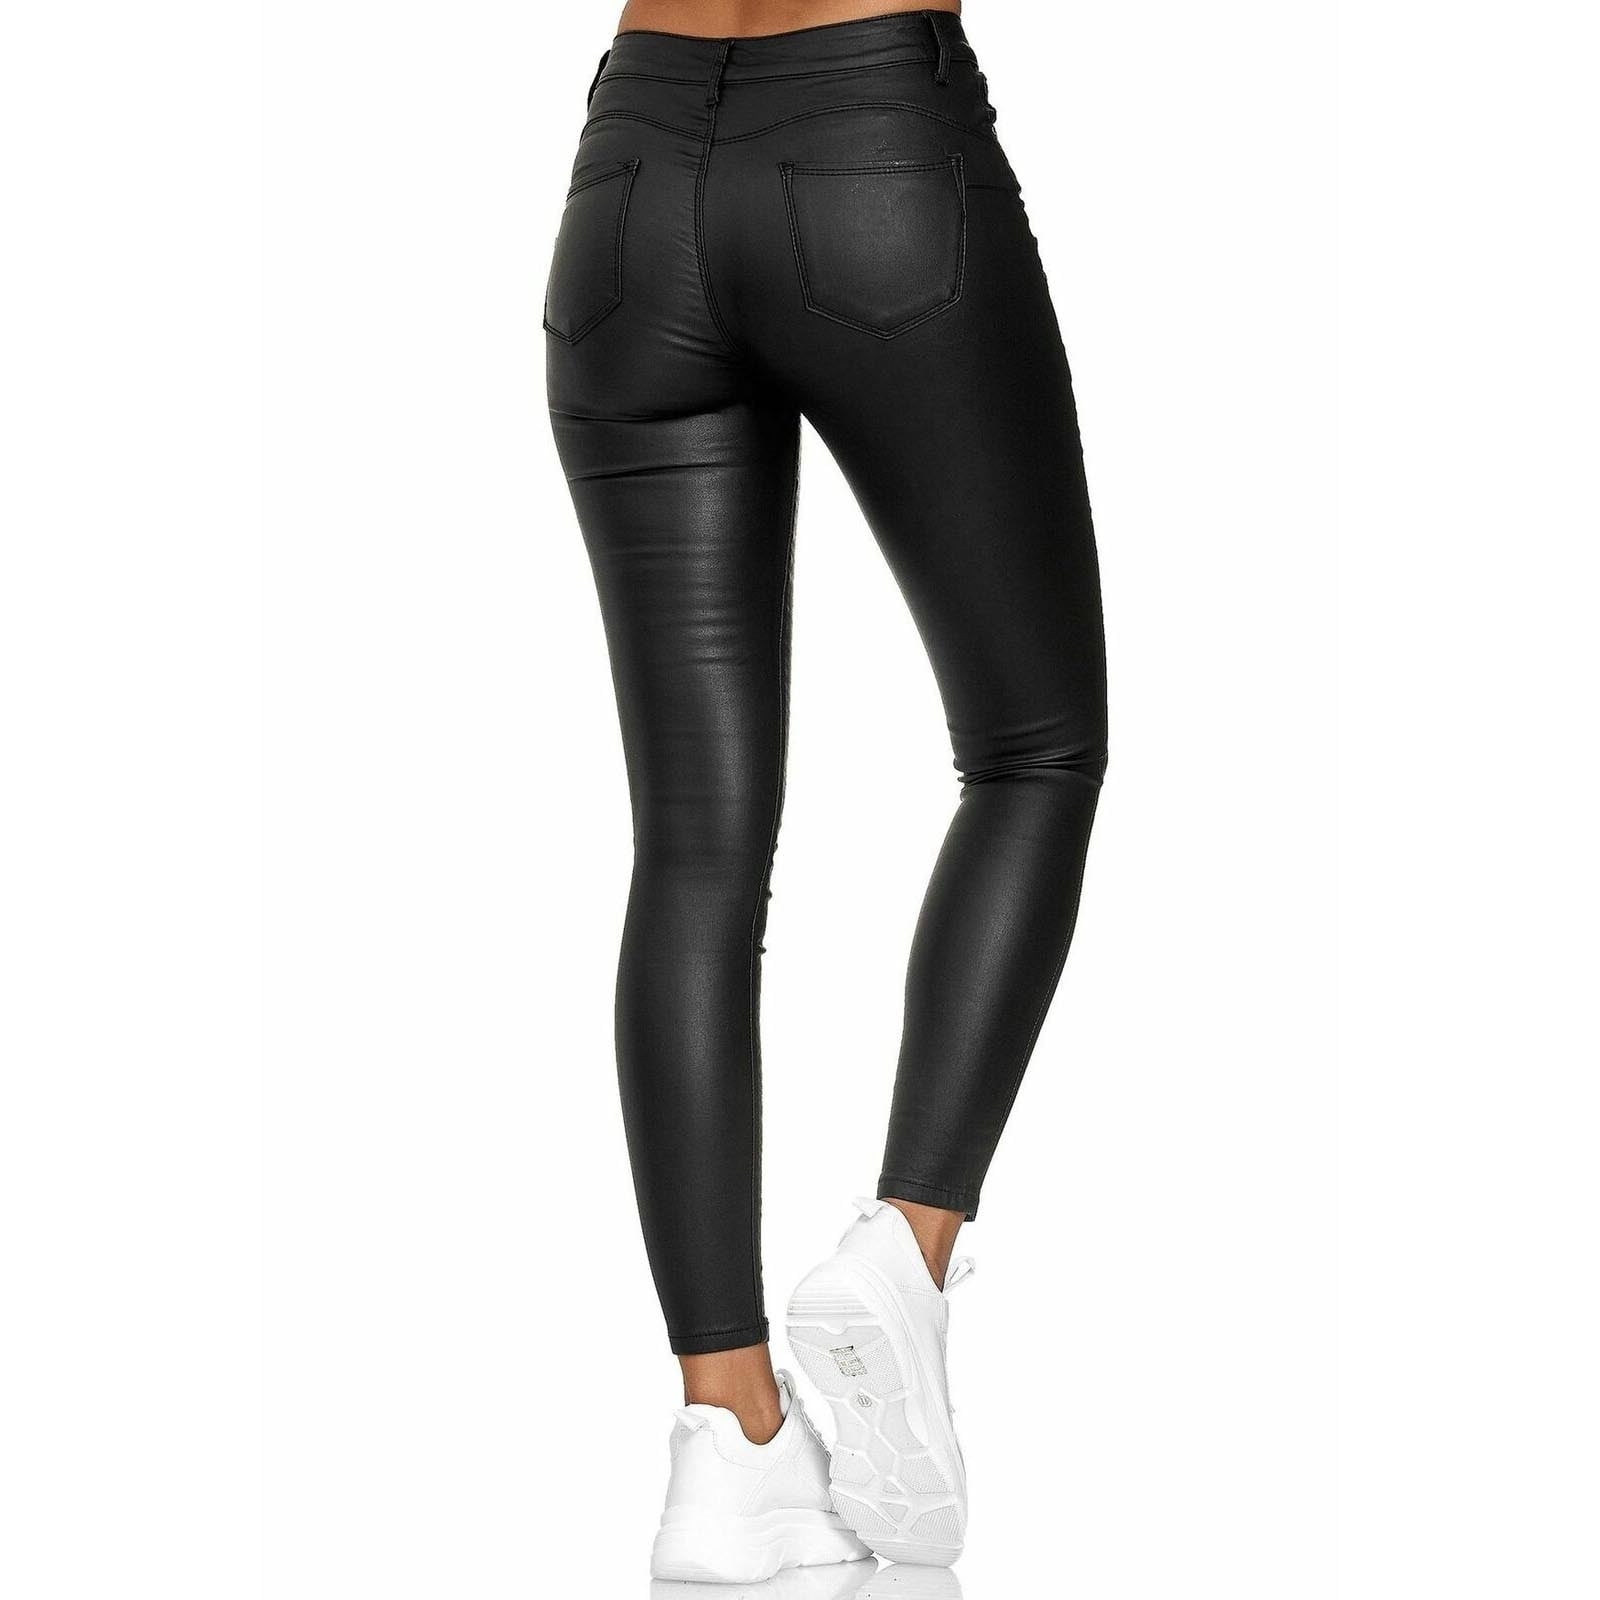 GRAPENT Black Pants for Women Black Jeans for Women Black Work Pants Women  Black Pants Black Slacks Women Black Faux Leather Pants Color Black Size XS  X-Small Size 0 Size 2 at